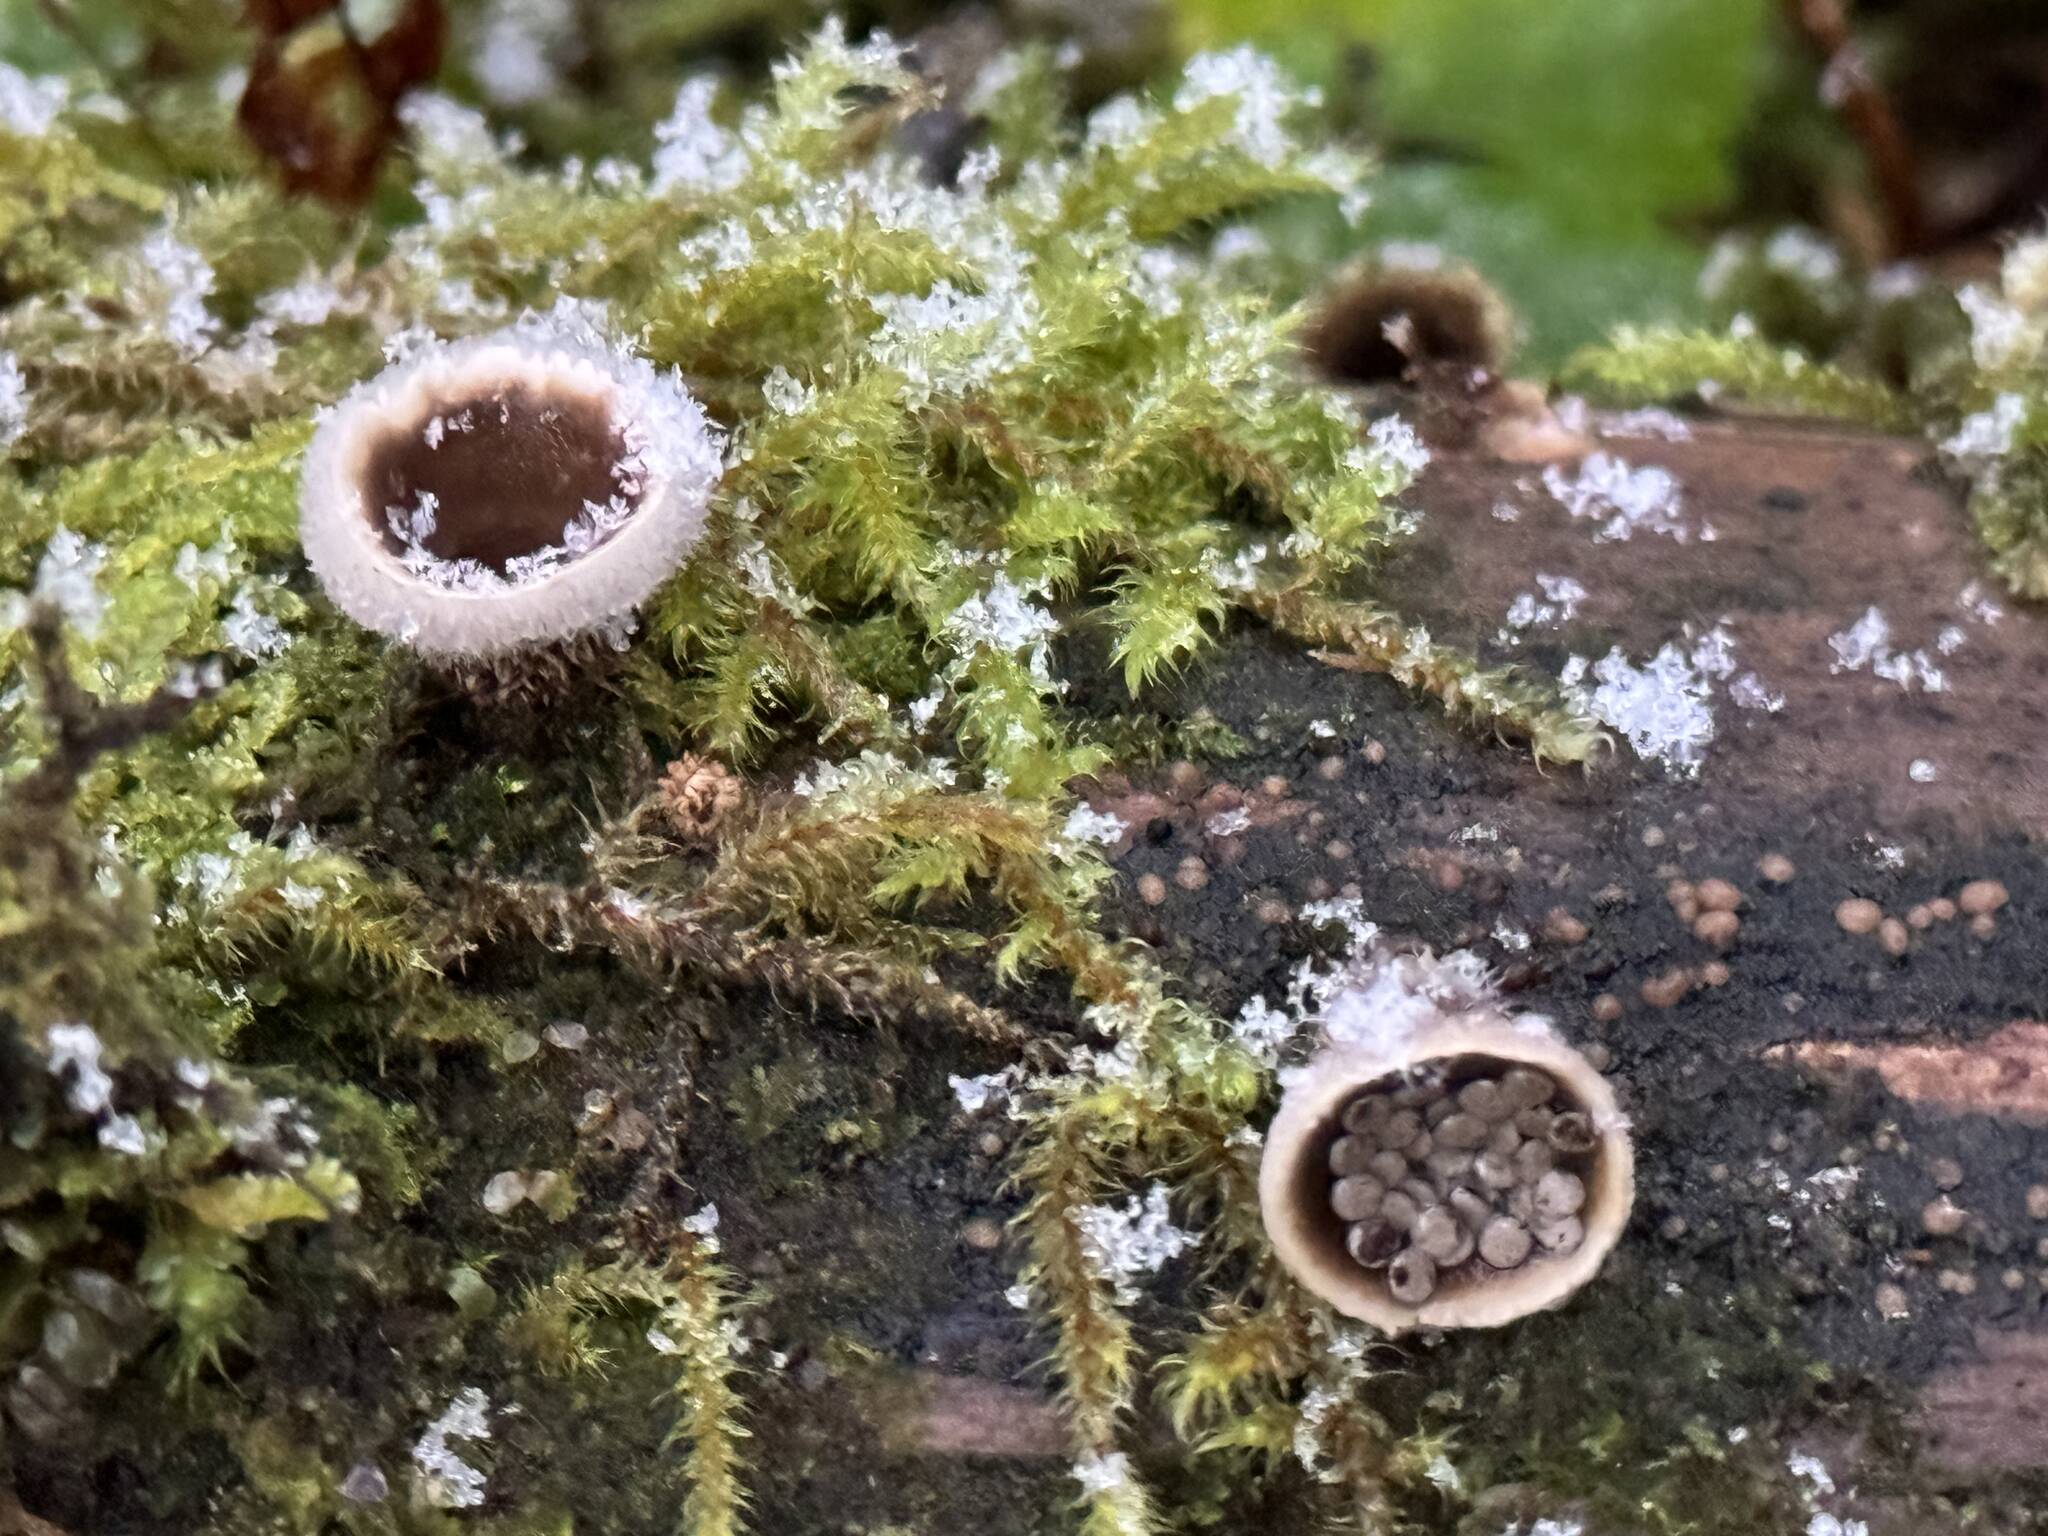 Birds nest fungi, with seeds in one, on the Lemon Creek Trail on Dec. 10. (Photo by Deana Barajas)